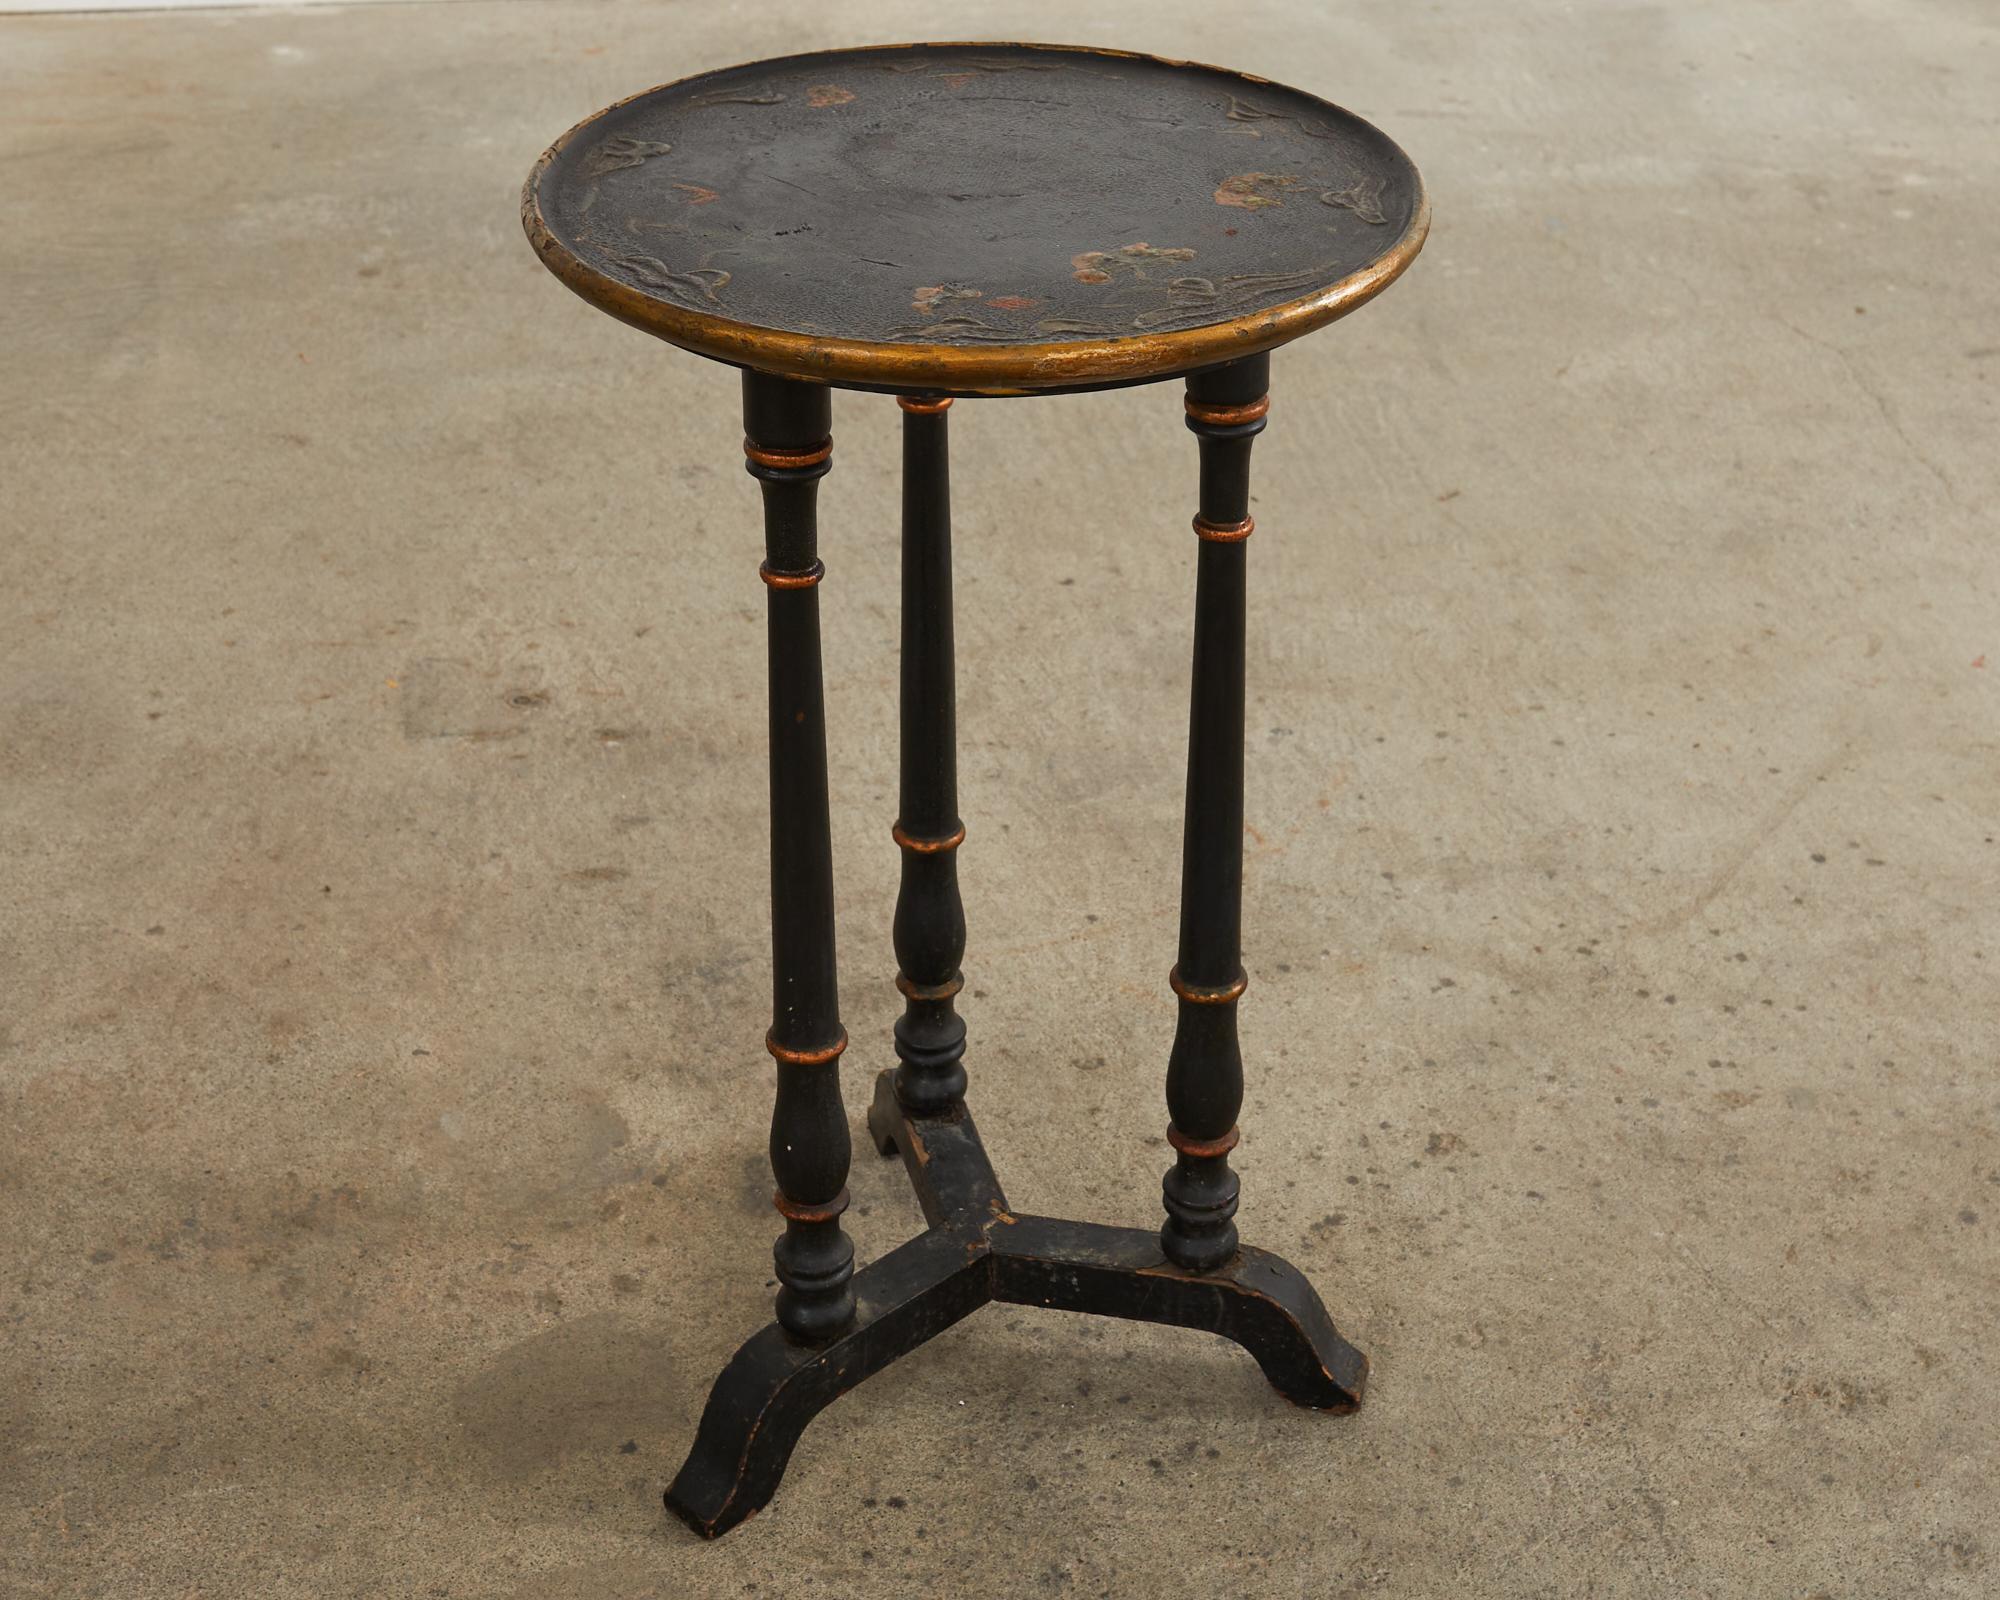 19th Century English Chinoiserie Revival Lacquered Drink Table 12